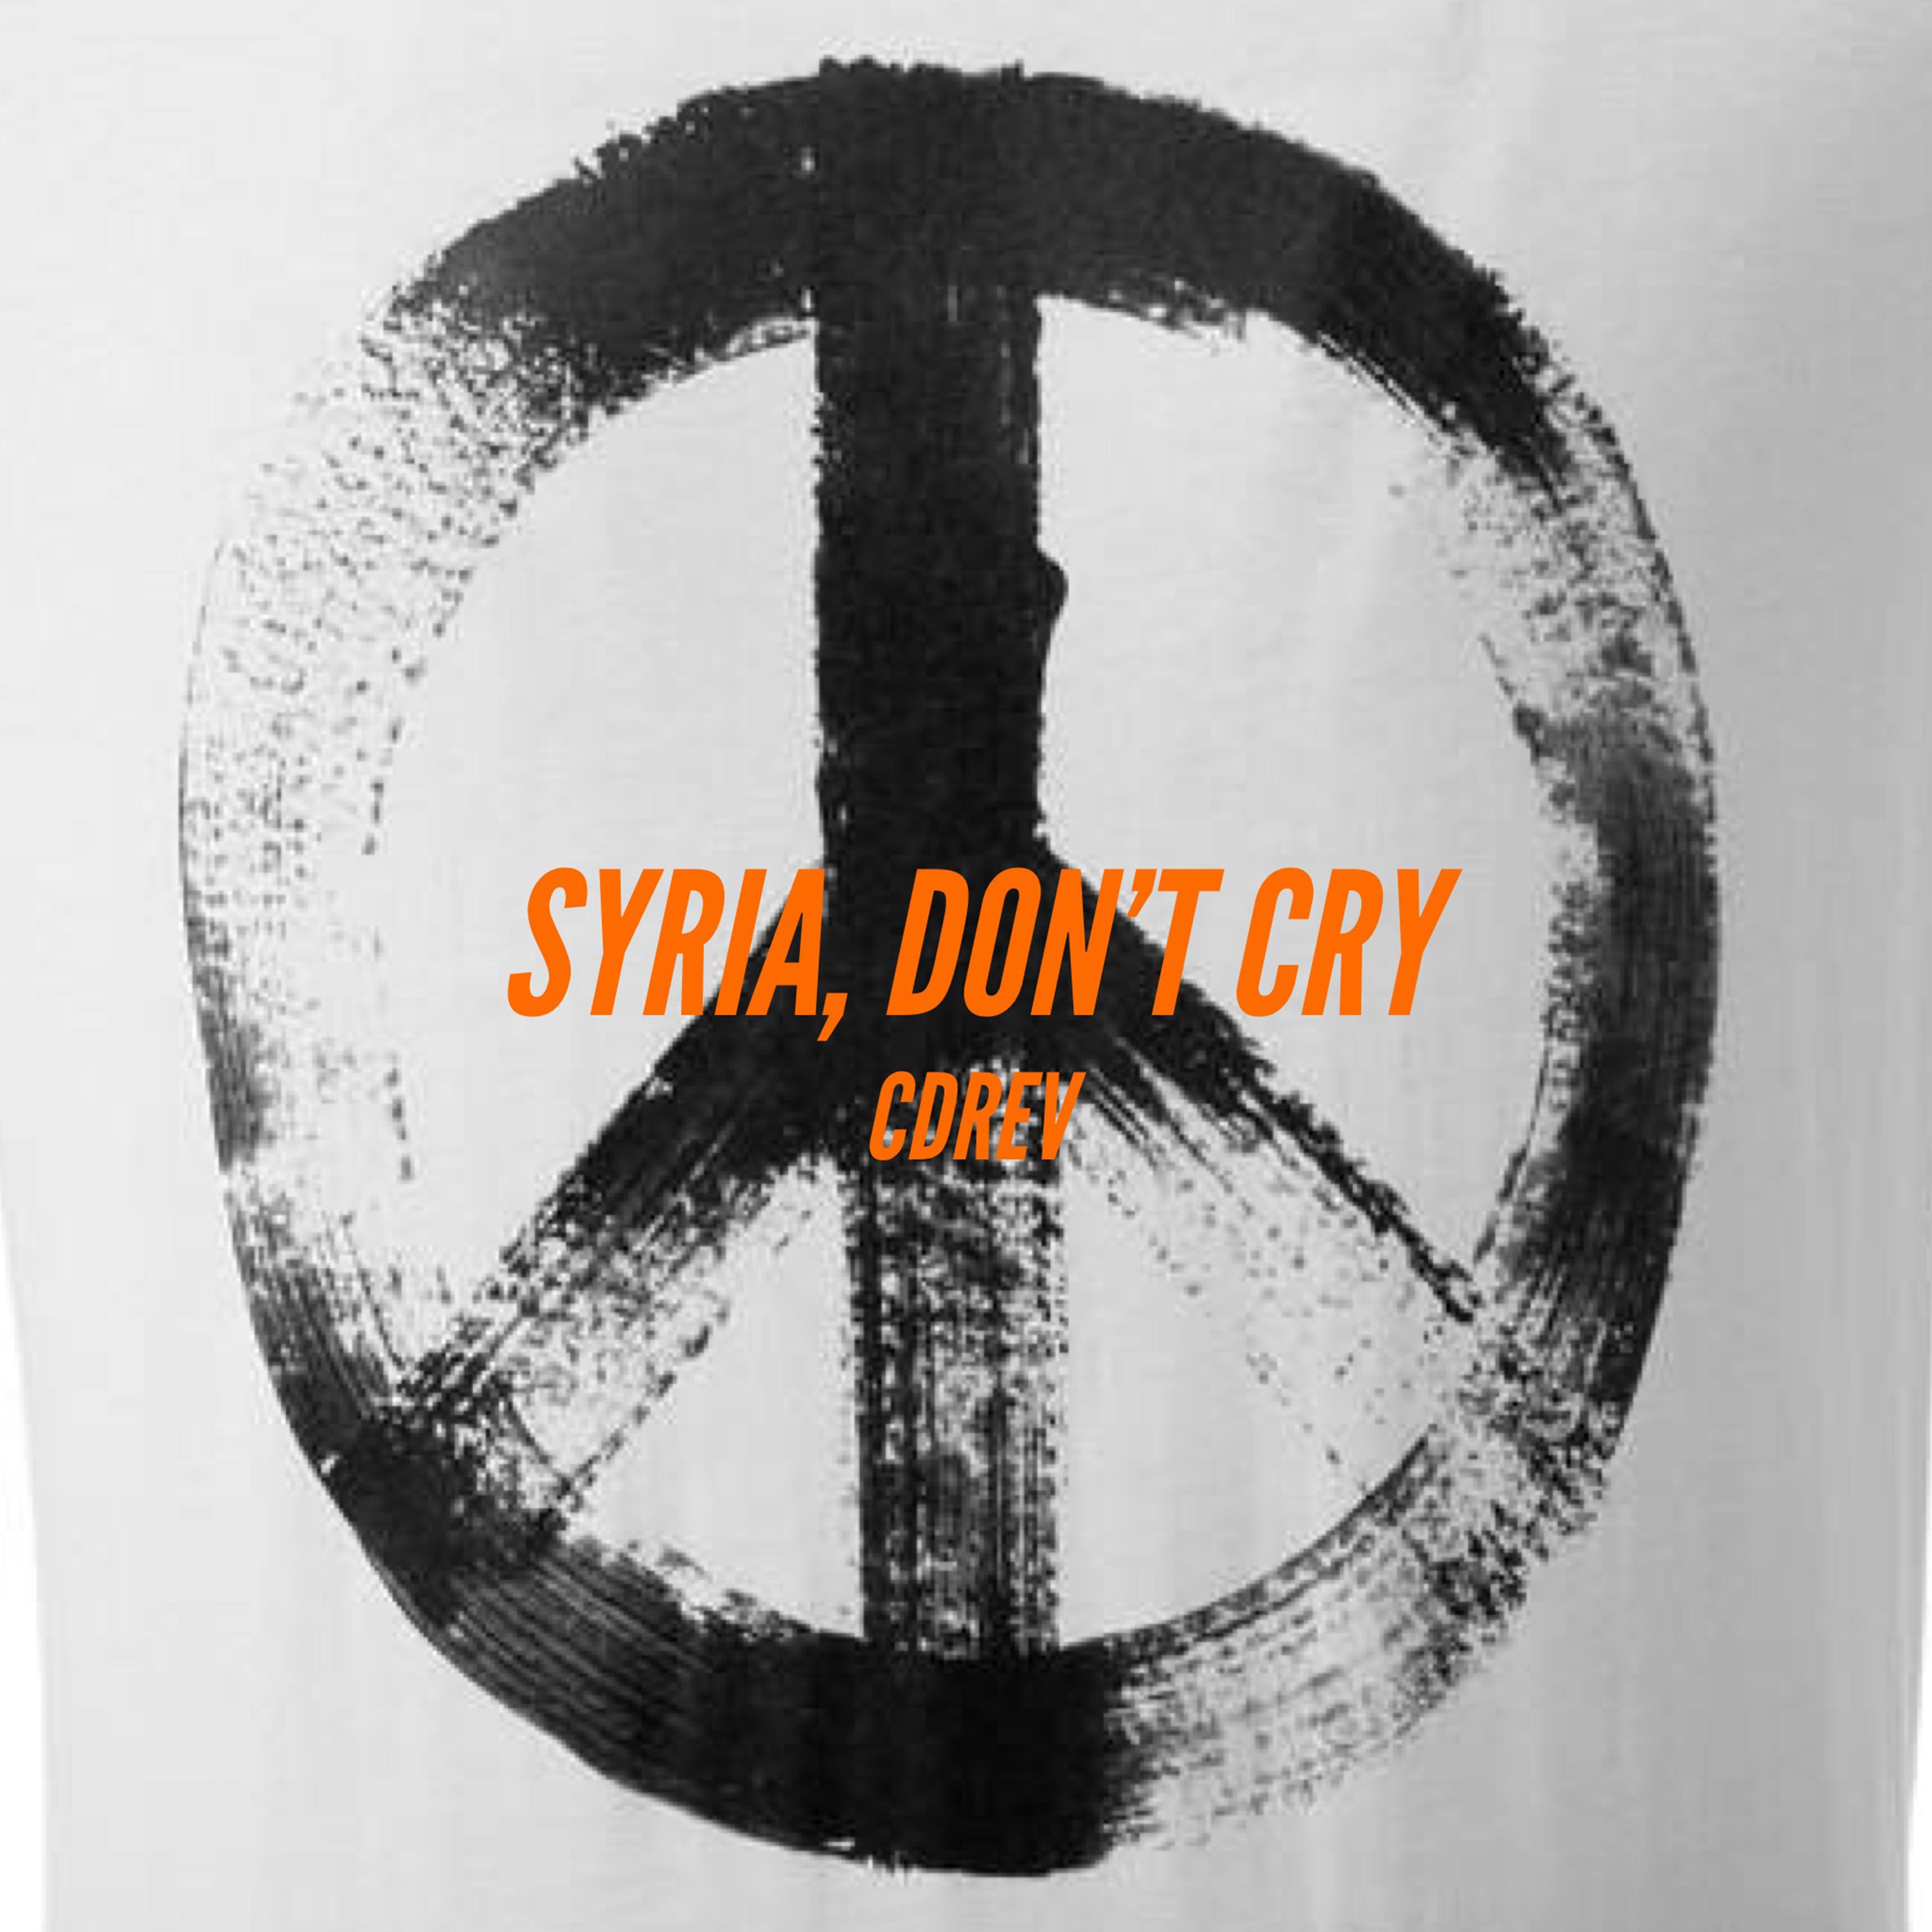 SYRIA, DON'T CRY